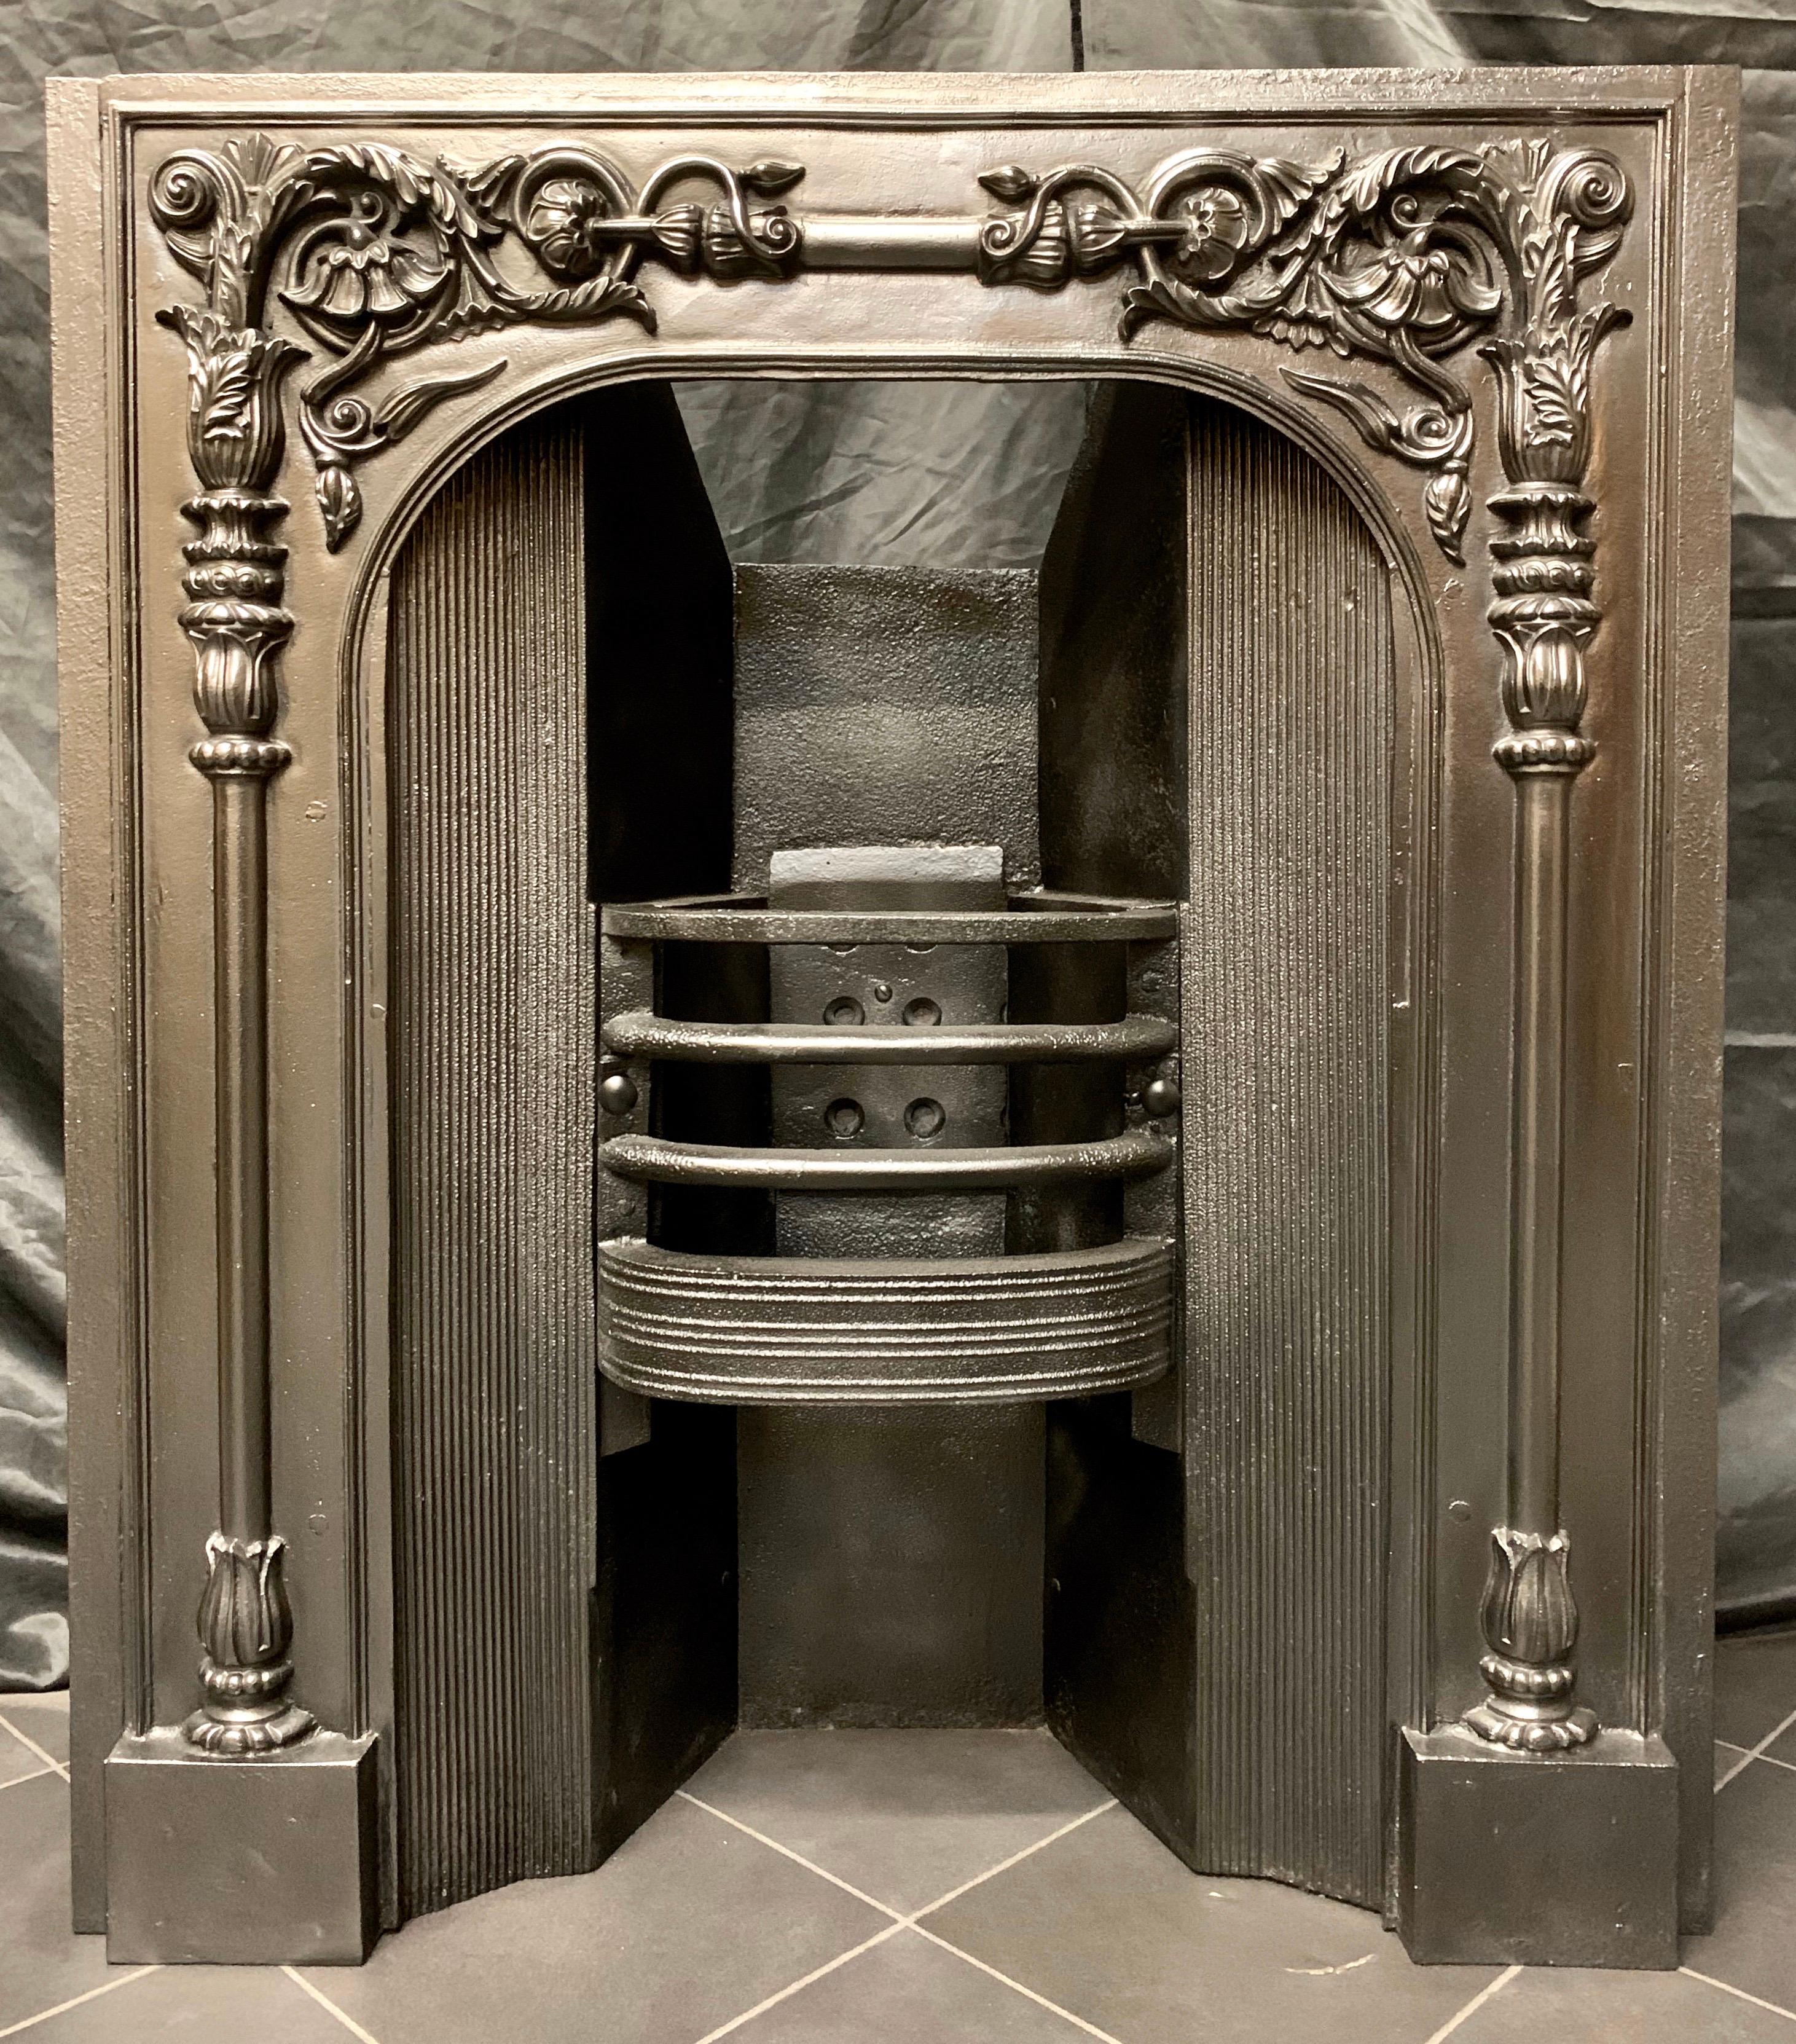 A rare early Victorian 19th century cast iron fireplace insert, with an integral fire grate, enhanced throughout with floral foliate detail. A set of slate slips could be supplied to increase the overall dimensions.
Scottish, circa 1840.